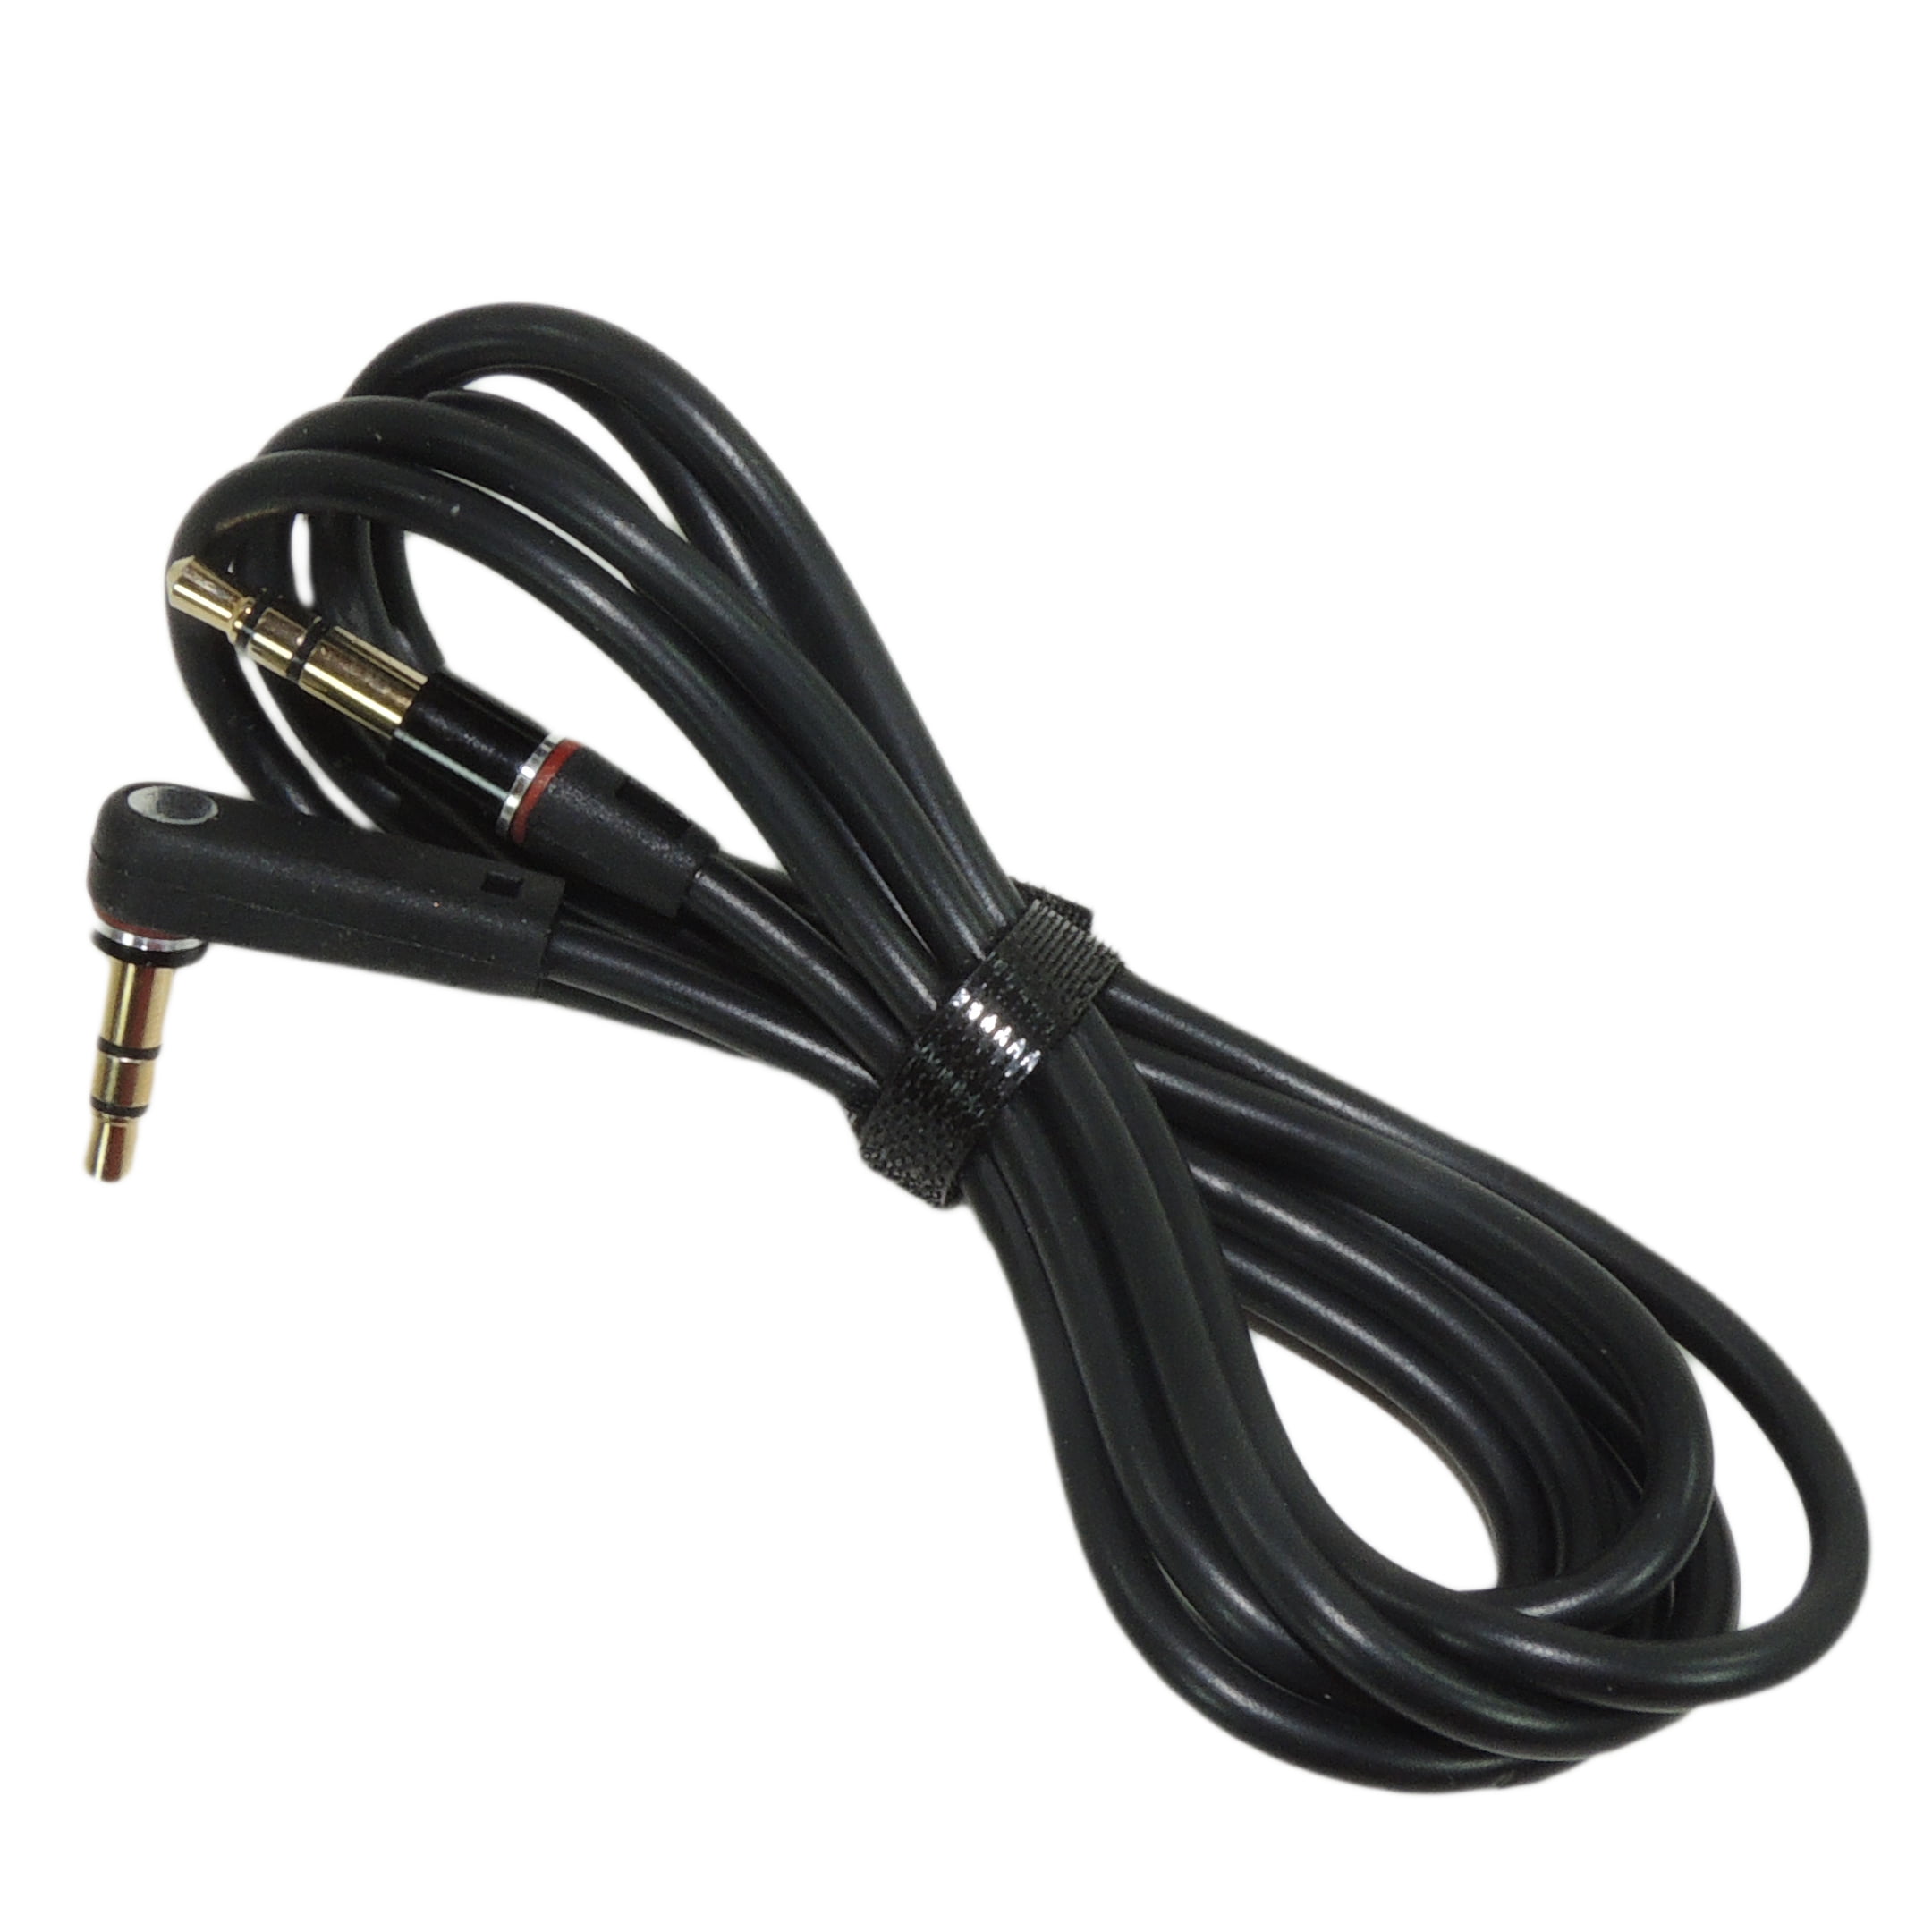 Black Aux Audio Cable for Beats by Dr 